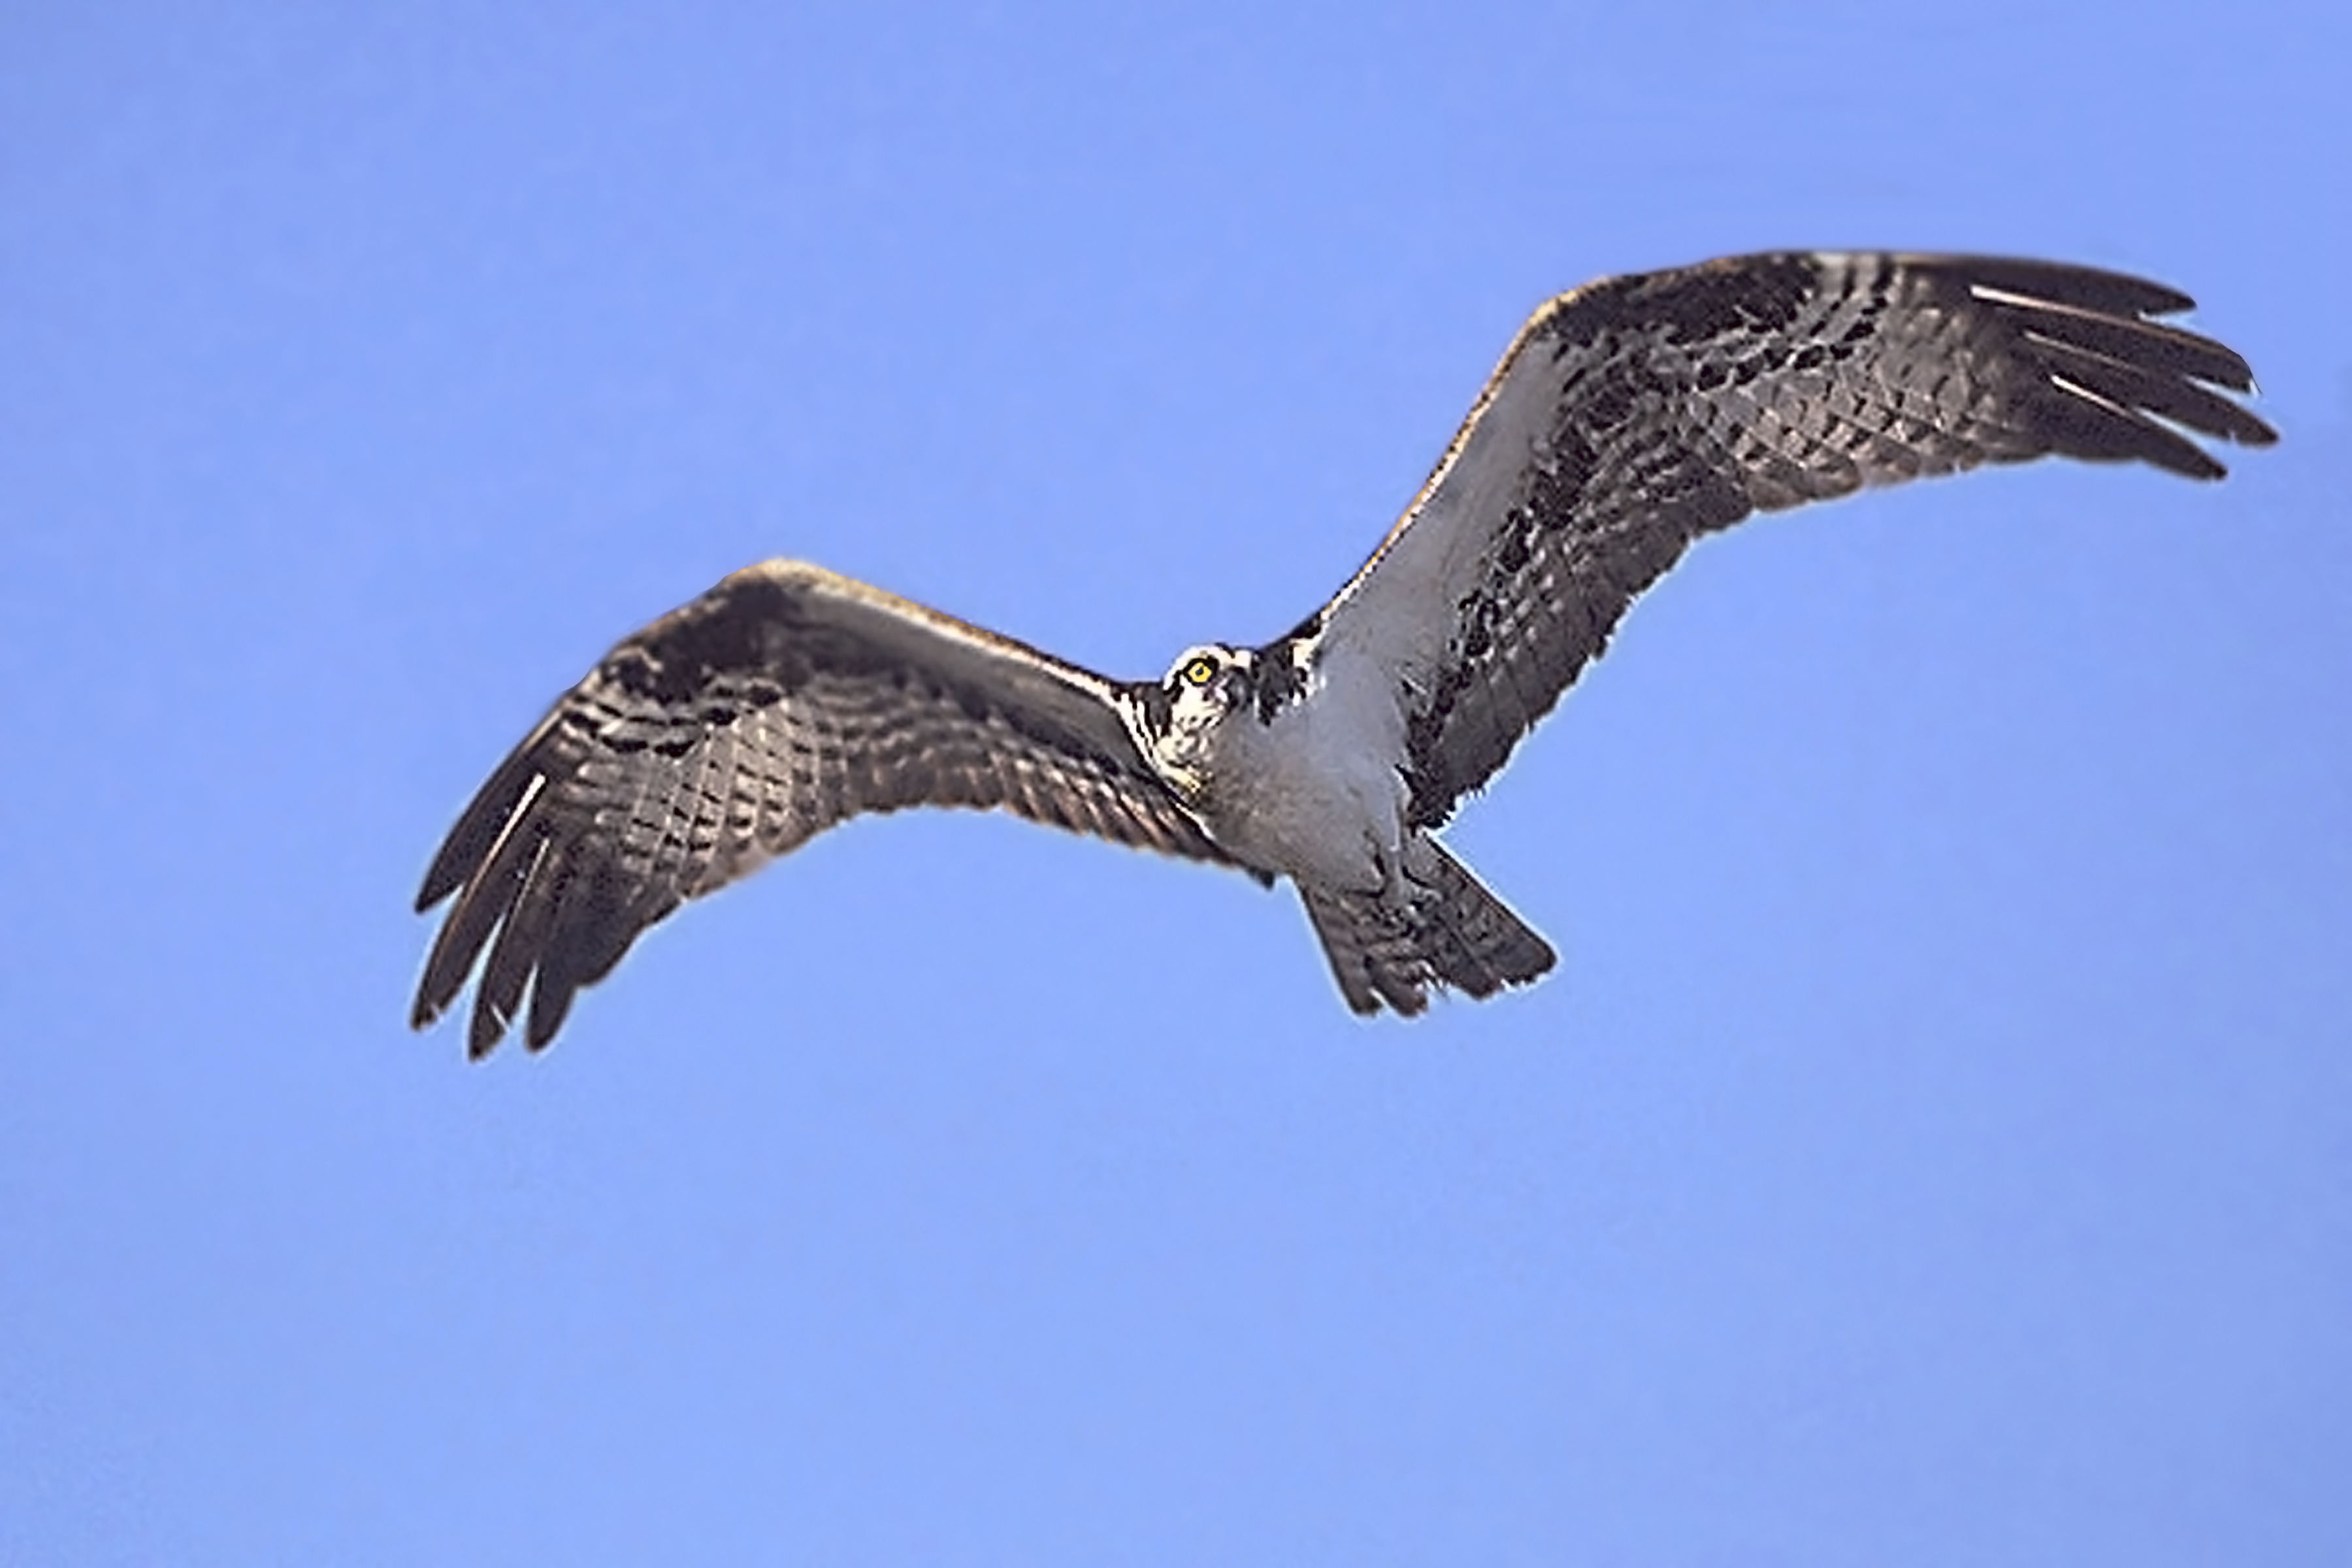 File:OSPREY FLYING WITH ONE EYE ON THE PRIZE.jpg - Wikimedia Commons